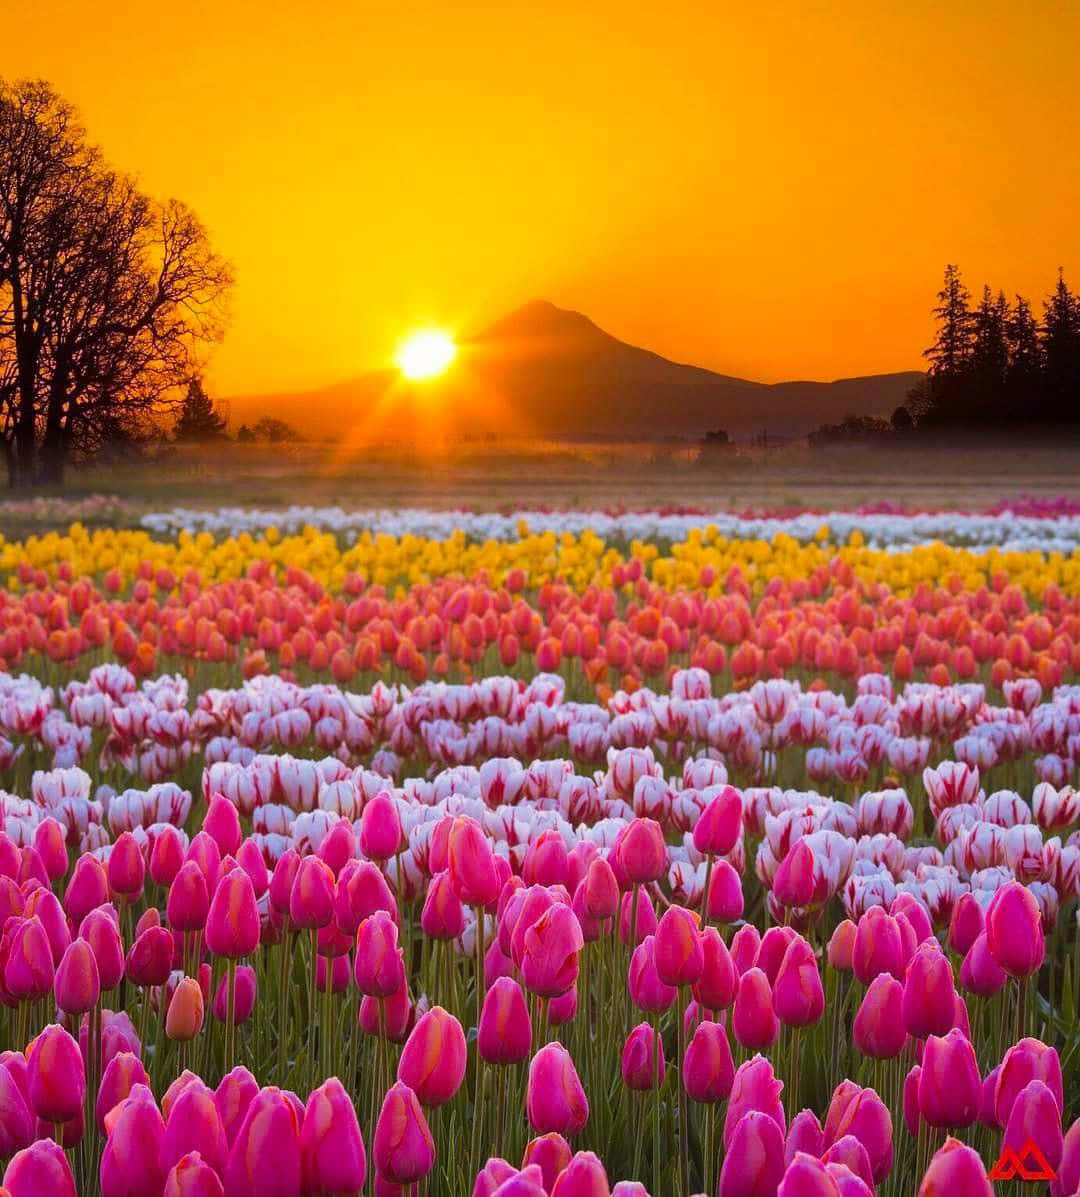 A Field Of Pink And White Tulips With The Sun Setting Behind Them